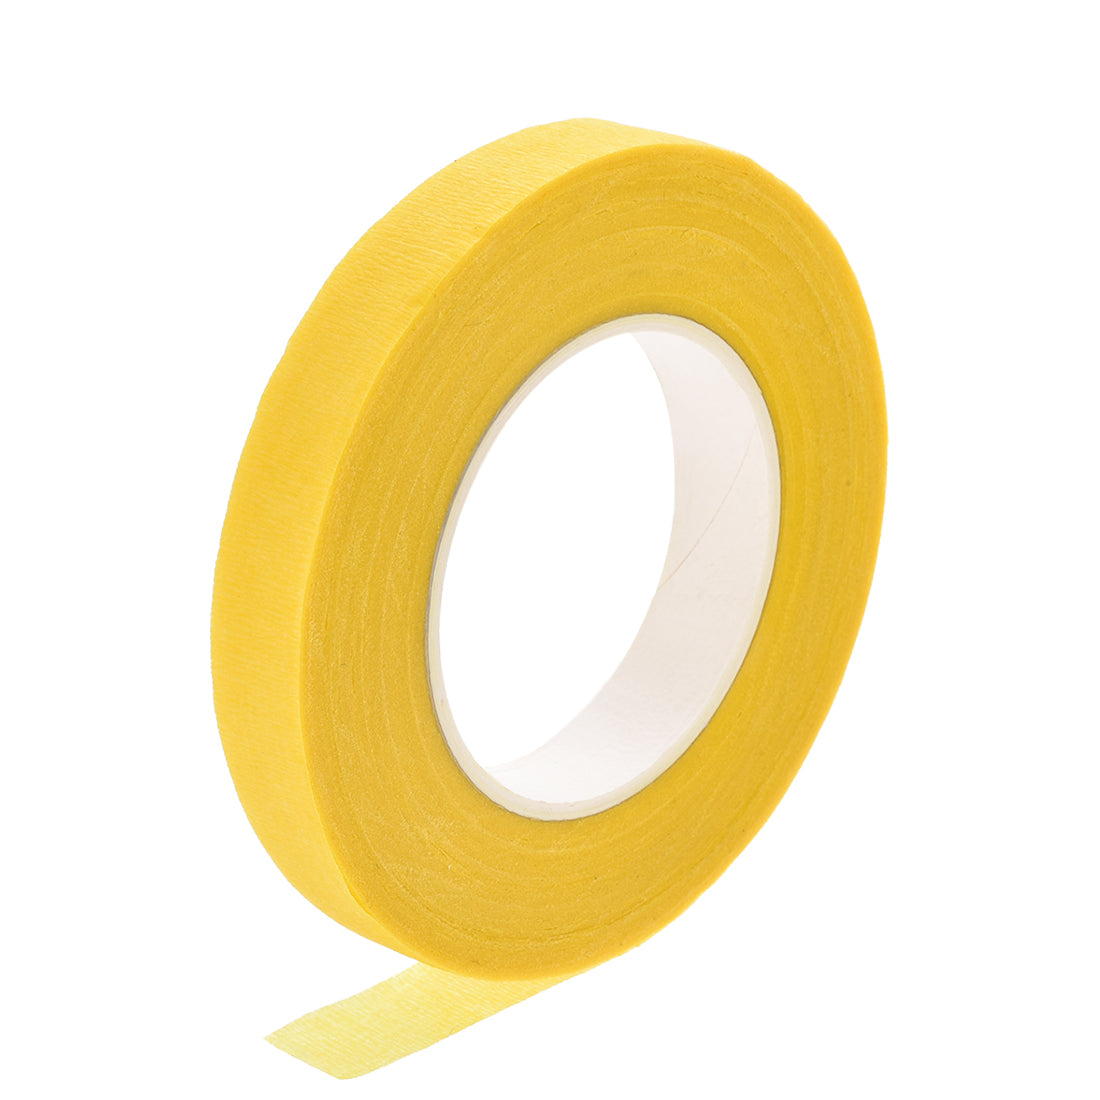 uxcell Uxcell 1Roll 1/2"x30Yard Yellow Floral Tape Flower Adhesives Floral Arrangement Kit